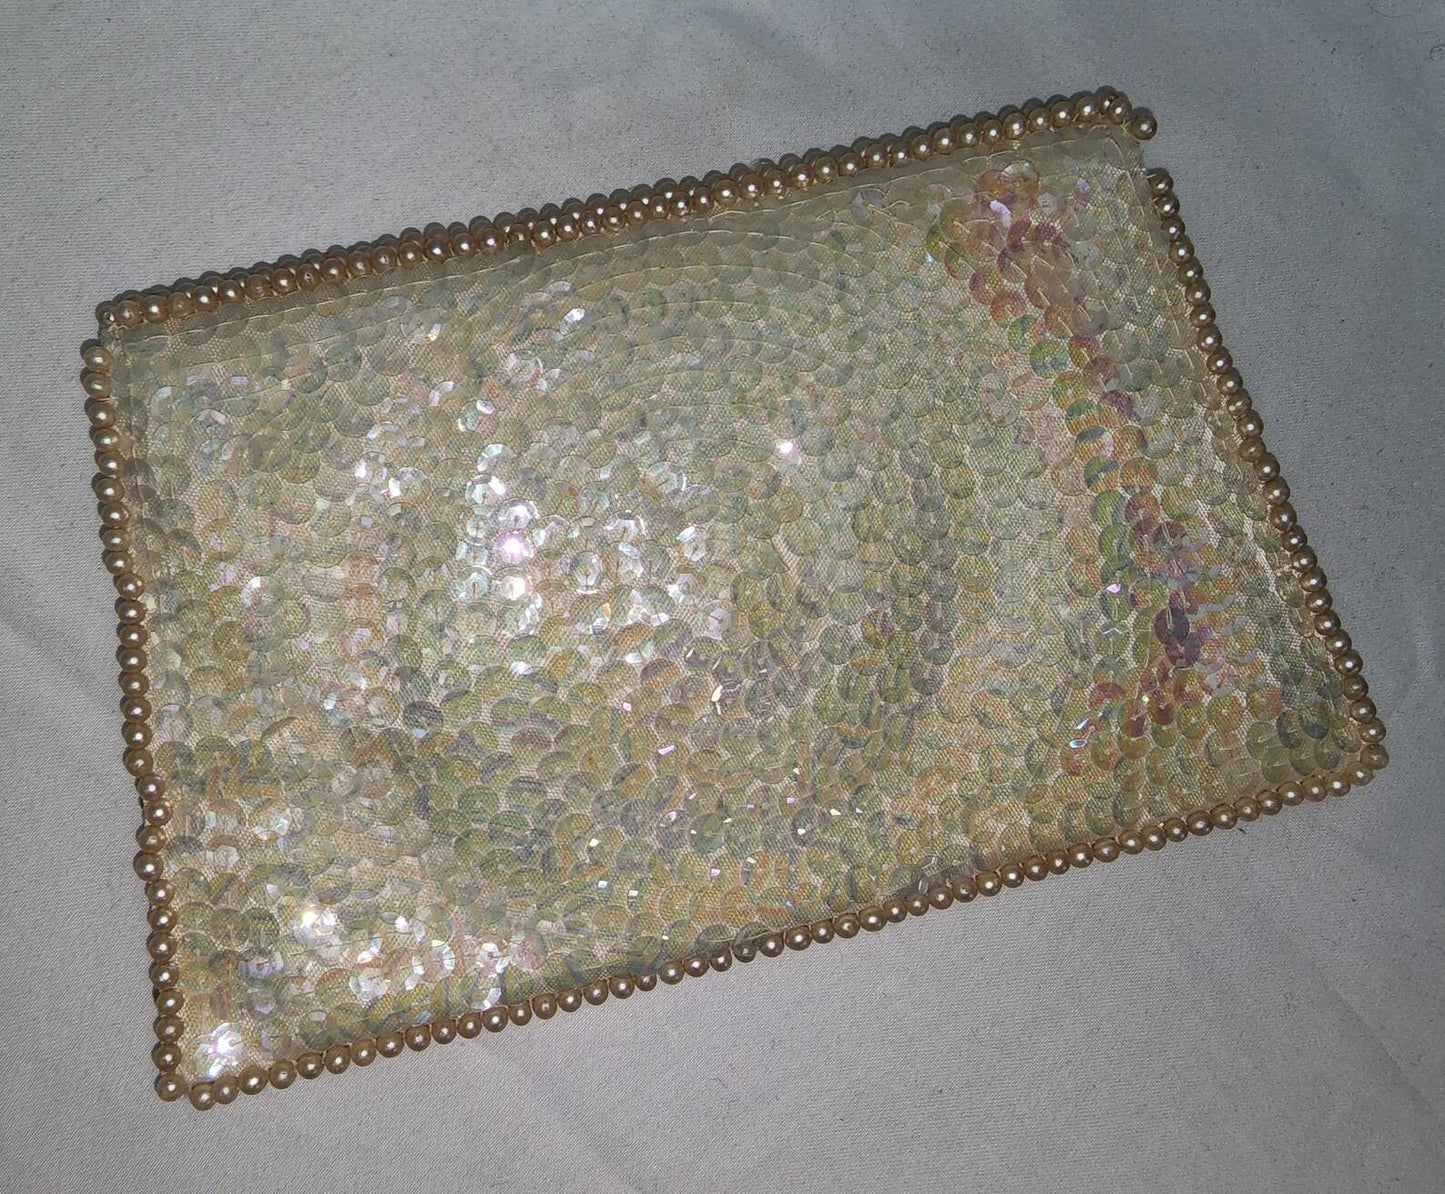 Vintage Sequin Bead Purse 1960s Small Cream Satin Beaded Sequin Butterfly Clutch Wedding Bridal Rockabilly 7.5 x 5 in. 1 or 2 missing pearl